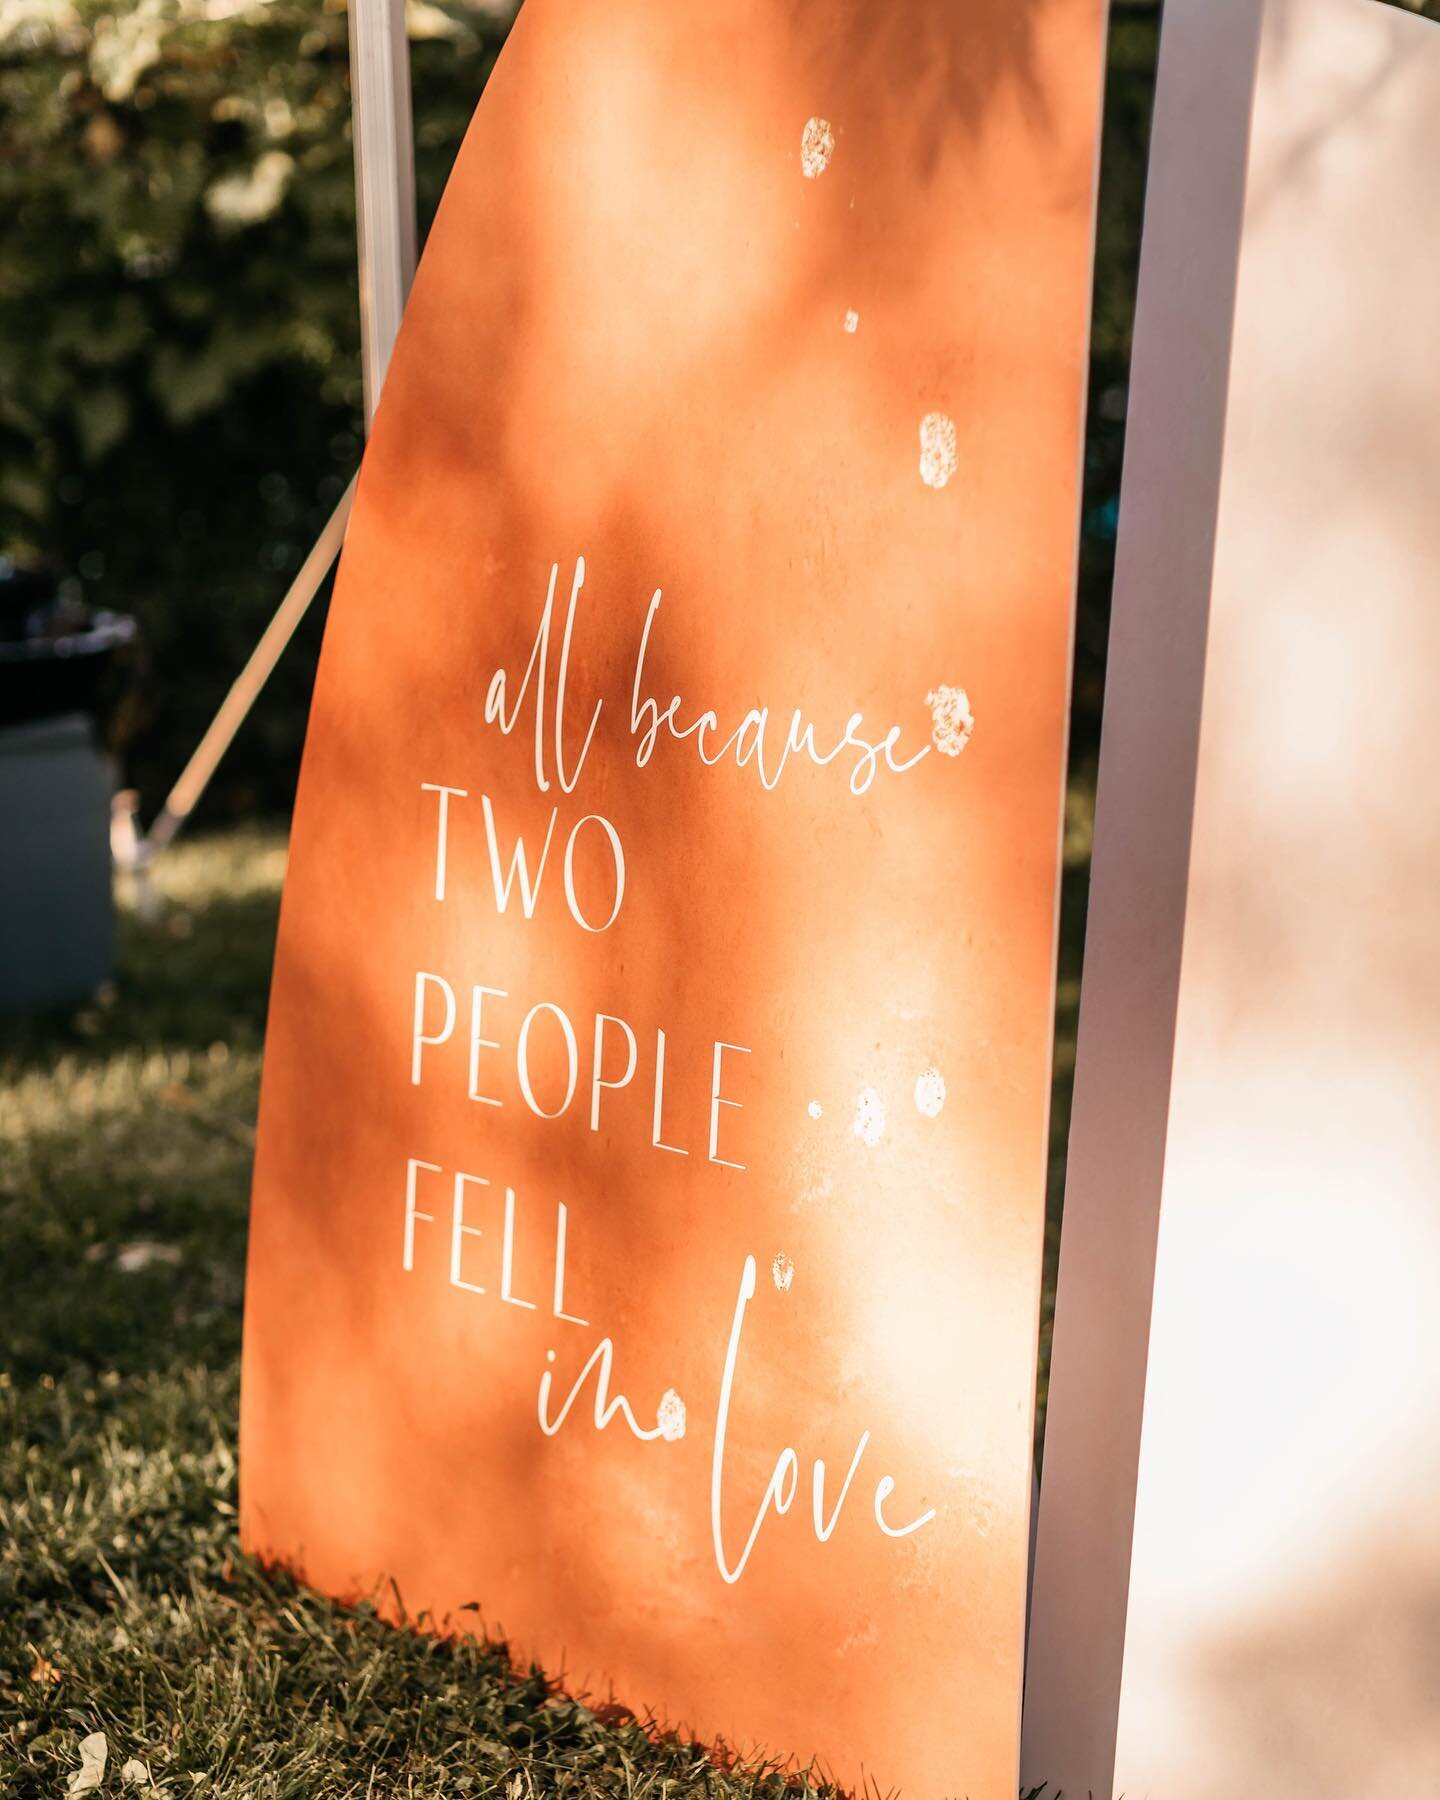 All because two people fell in love ..

Month Of: @helloebonyxivory &bull; Photography: @camiellestewartphotography &bull; Signage: @shopbreadandcircus @tphcanada

#Wedding #WeddingPlanner #TorontoWeddingPlanner #EventPlanner #Events #TorontoEventPla